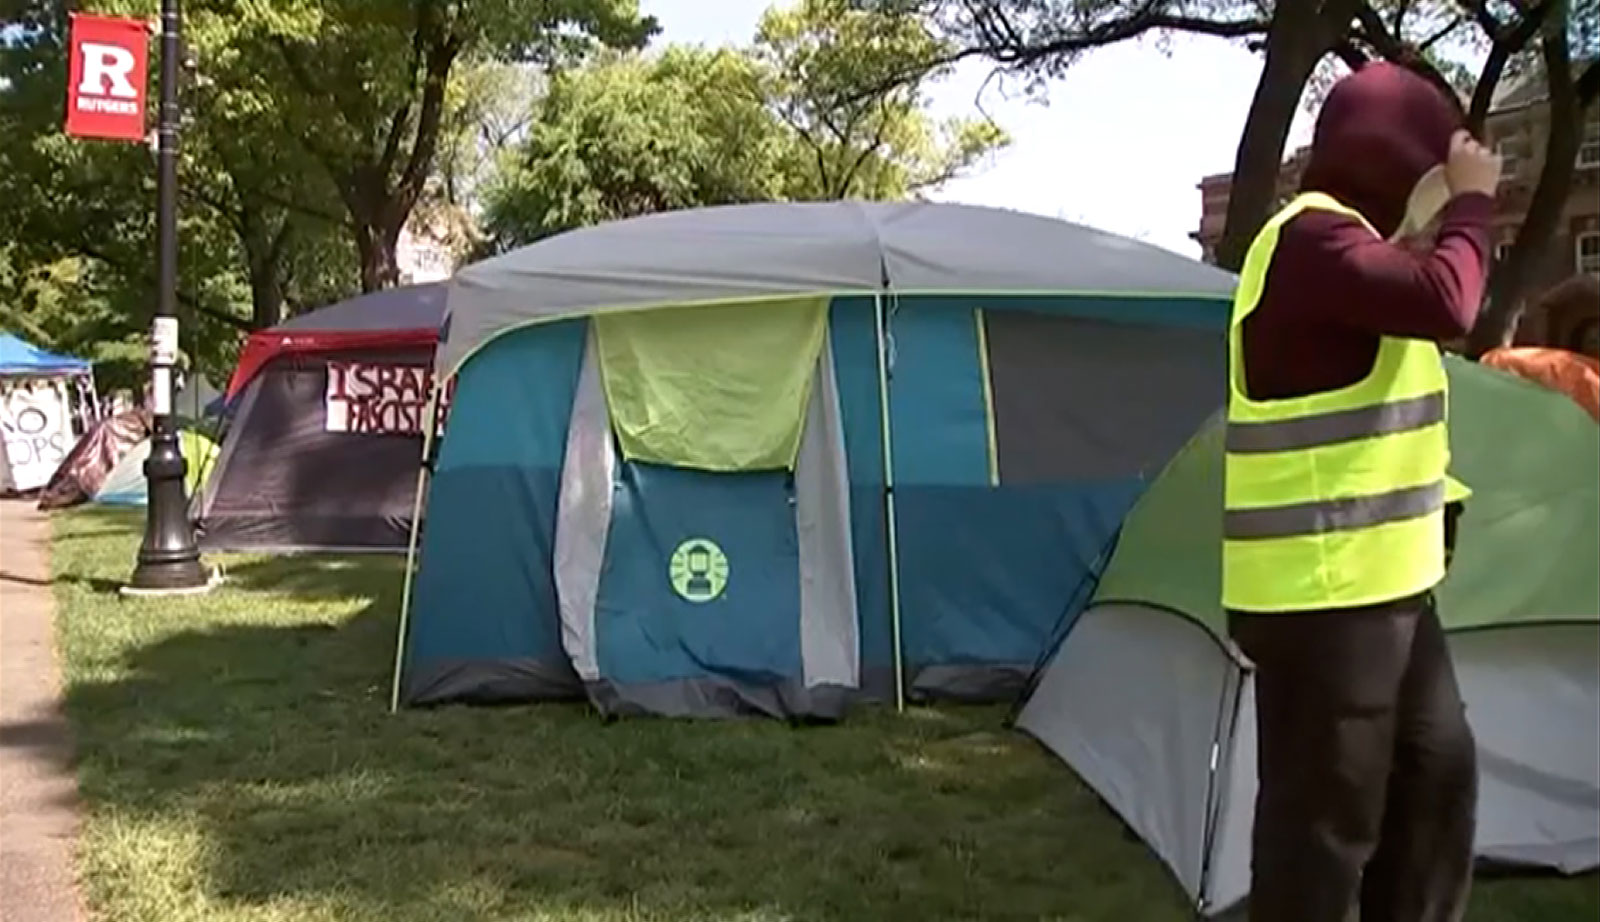 An encampment is seen at Rutgers University in New Brunswick, New Jersey, on Thursday.